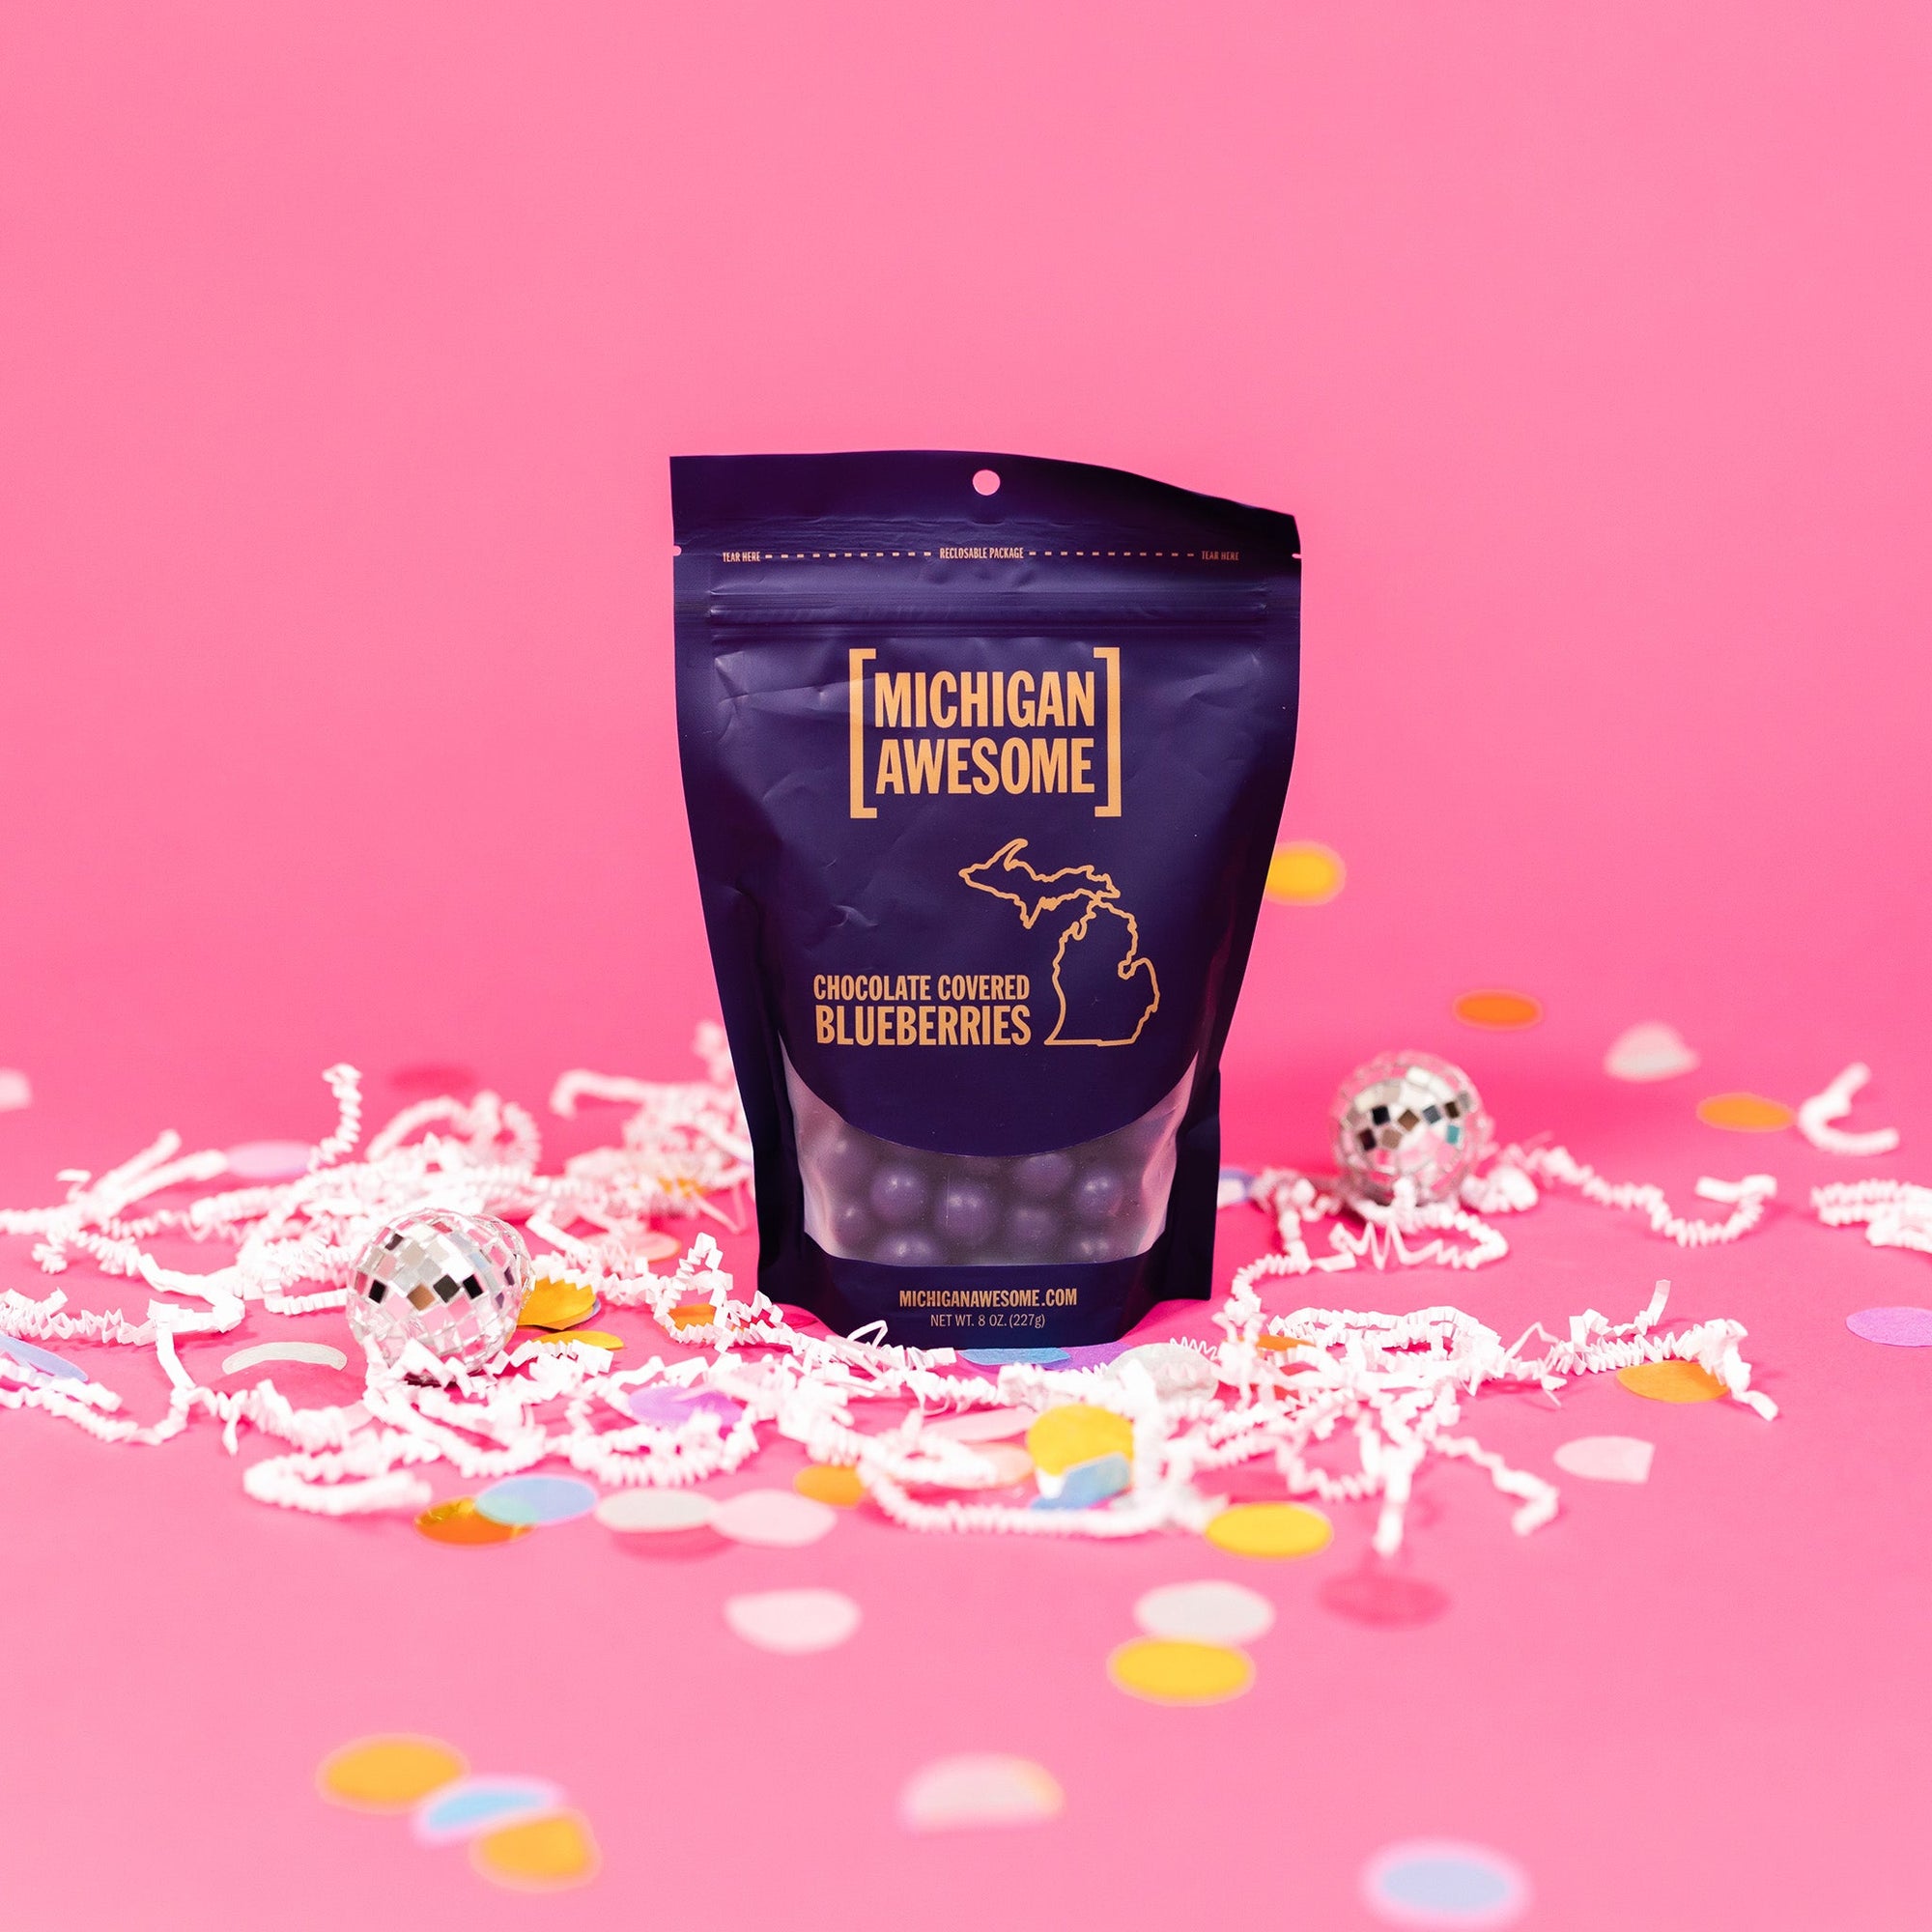 On a bubblegum pink background sits a bag with white crinkle and big, colorful confetti scattered around. There are mini disco balls. It is filled with chocolate covered blueberries. It says "MICHIGAN AWESOME," and "CHOCOLATE COVERED BLUEBERRIES" in goldish-yellow, all caps block font. It has an outlined illustration of the state of Michigan-UP. NET WT. 8 OZ. (227G)